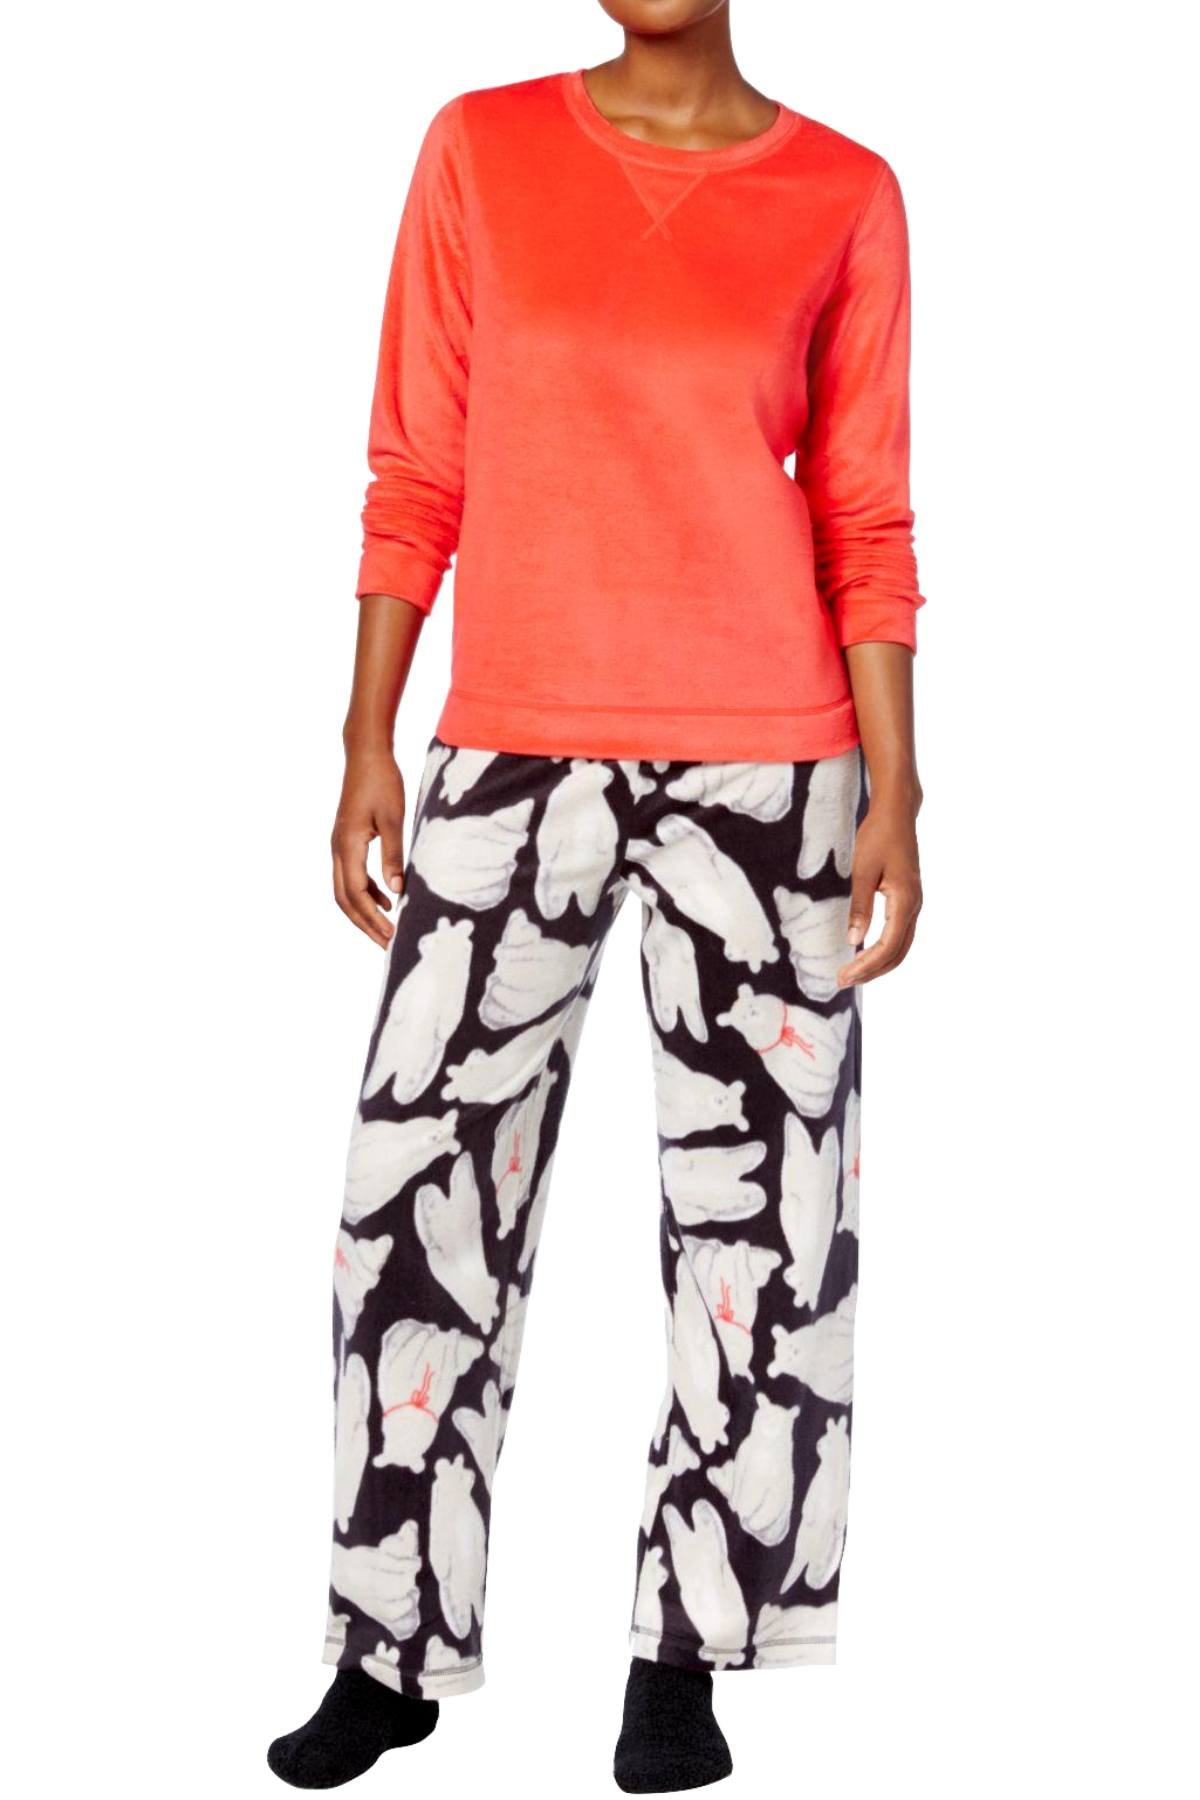 HUE Lollipop-Red Sueded Fleece Top and Bear-Printed Pant 3-Piece Pajama Set